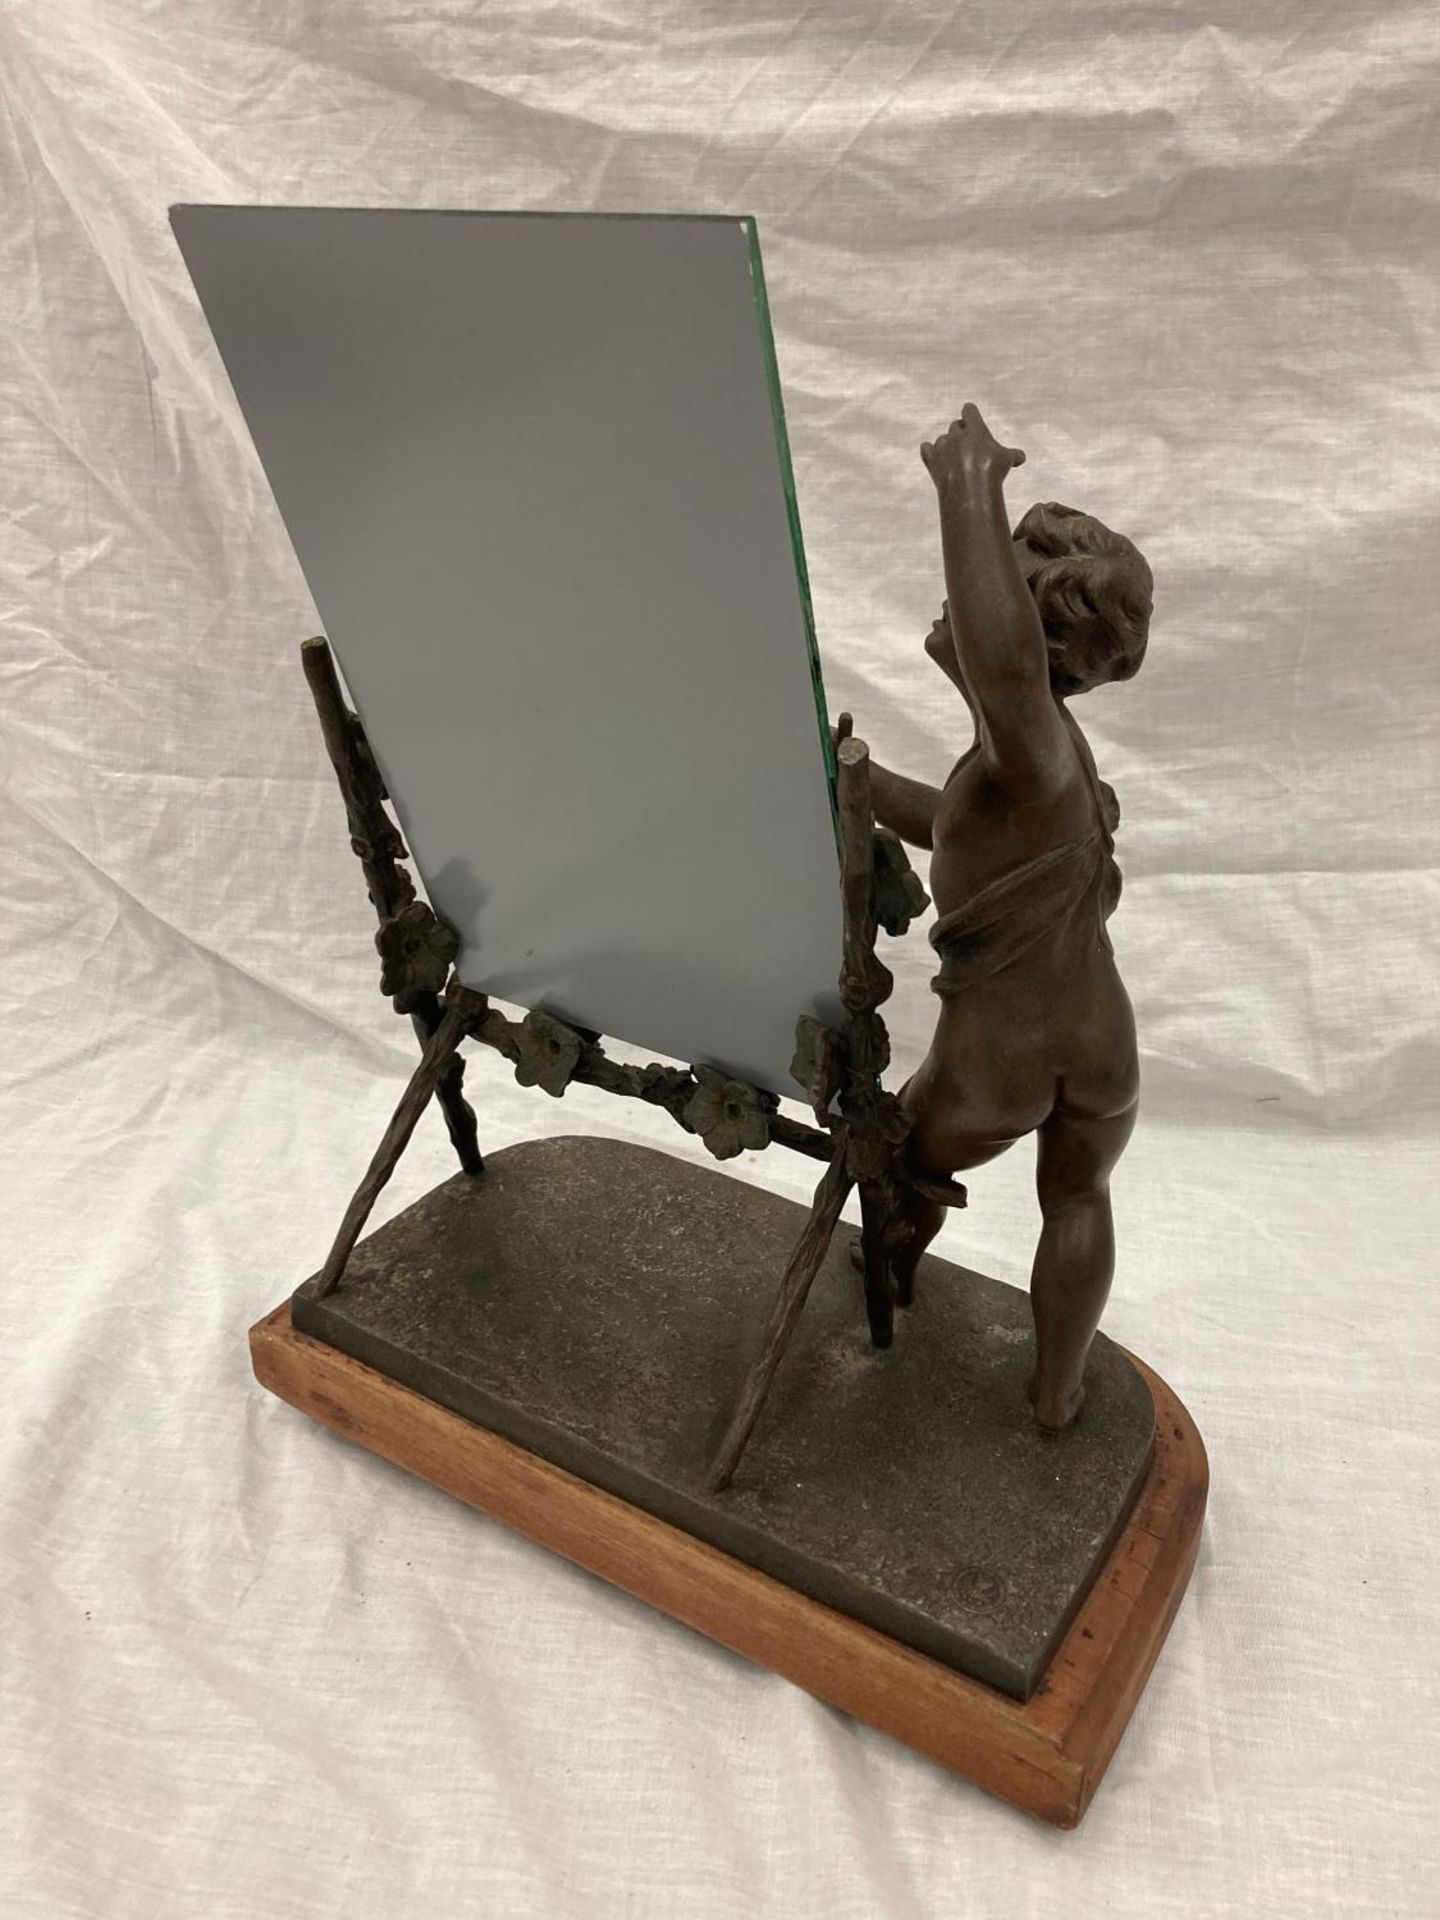 A VINTAGE FRENCH BRONZED FIGURE OF A BOY AND A TRELLIS OF FLOWERS SUPPORTING A MIRROR (MIRROR NOT - Image 4 of 5